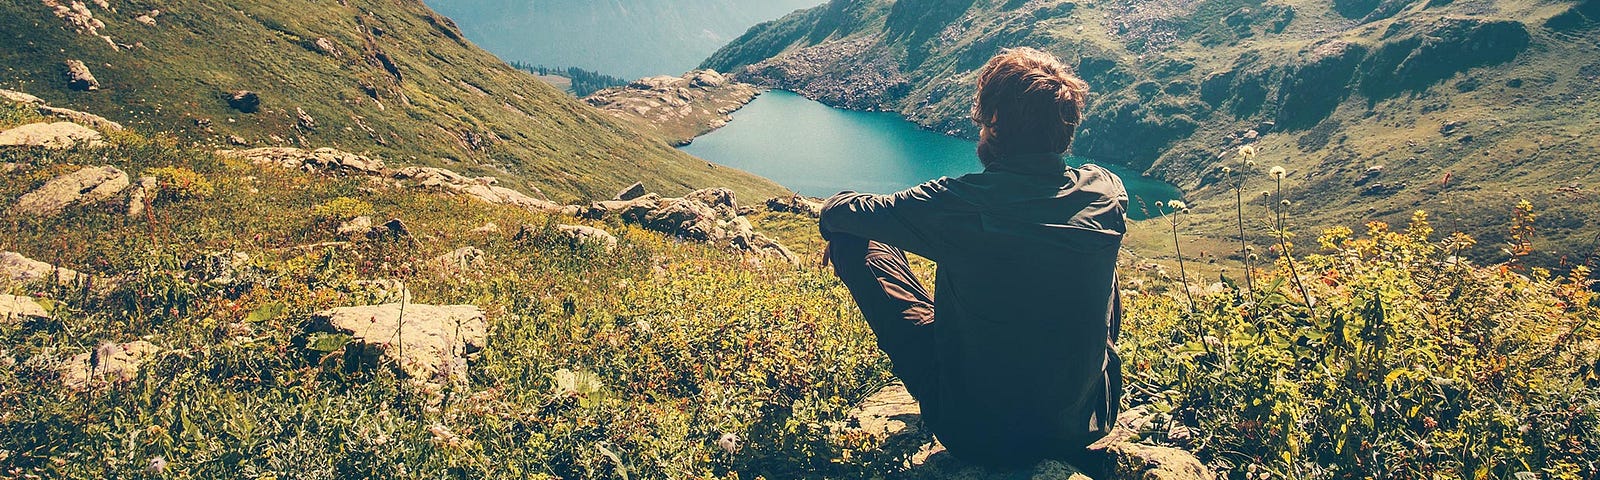 Silent man sitting on a mountainside looking at a lake